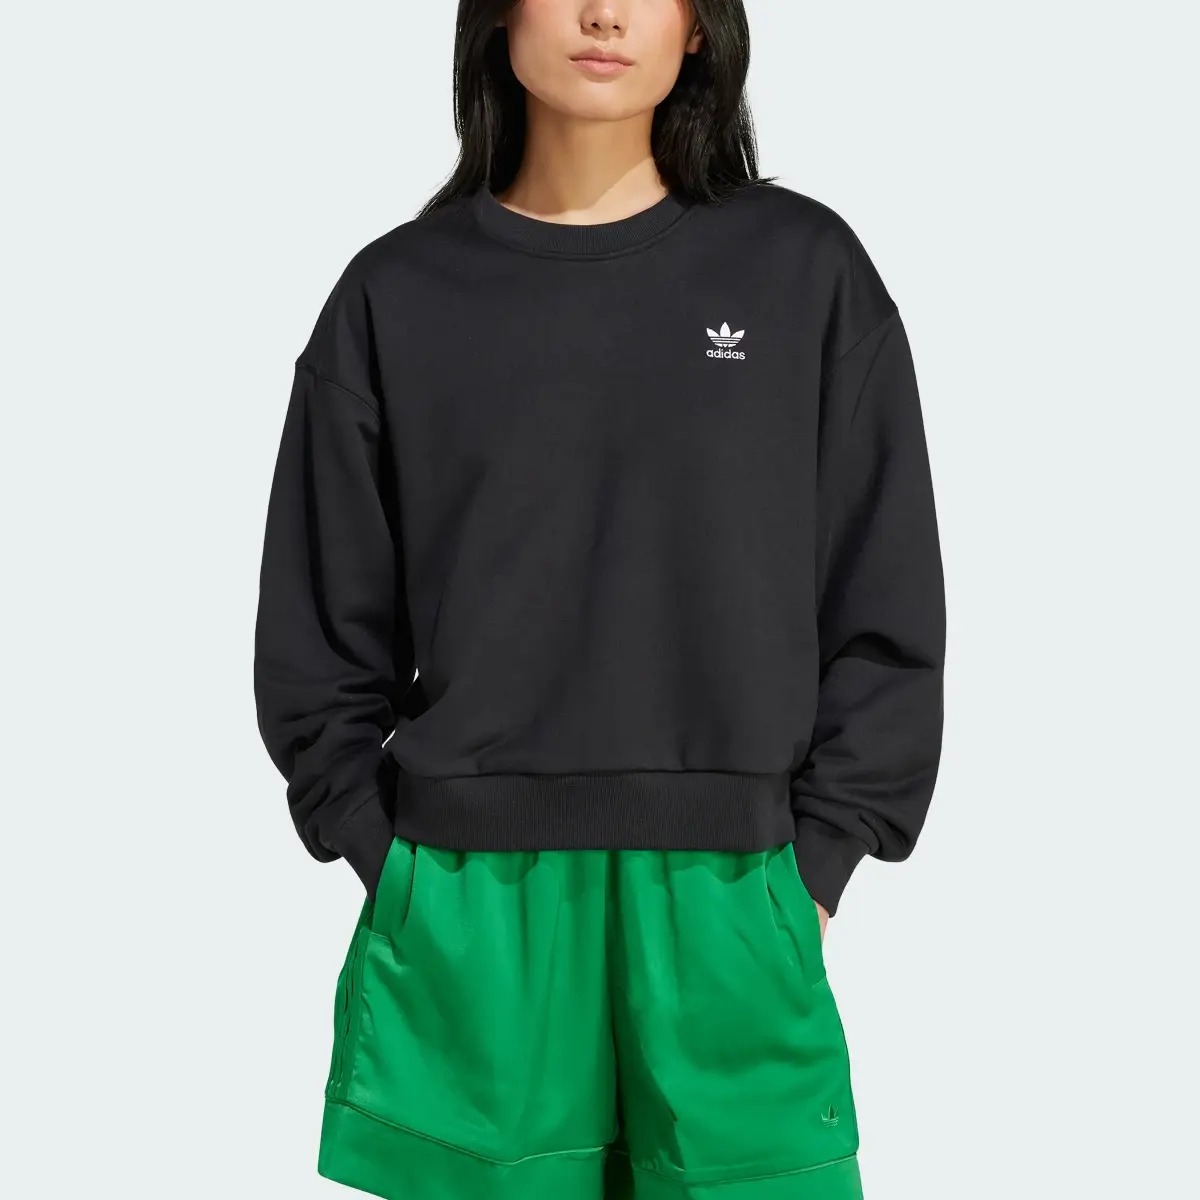 Adidas Trefoil Cropped Sweater. 1